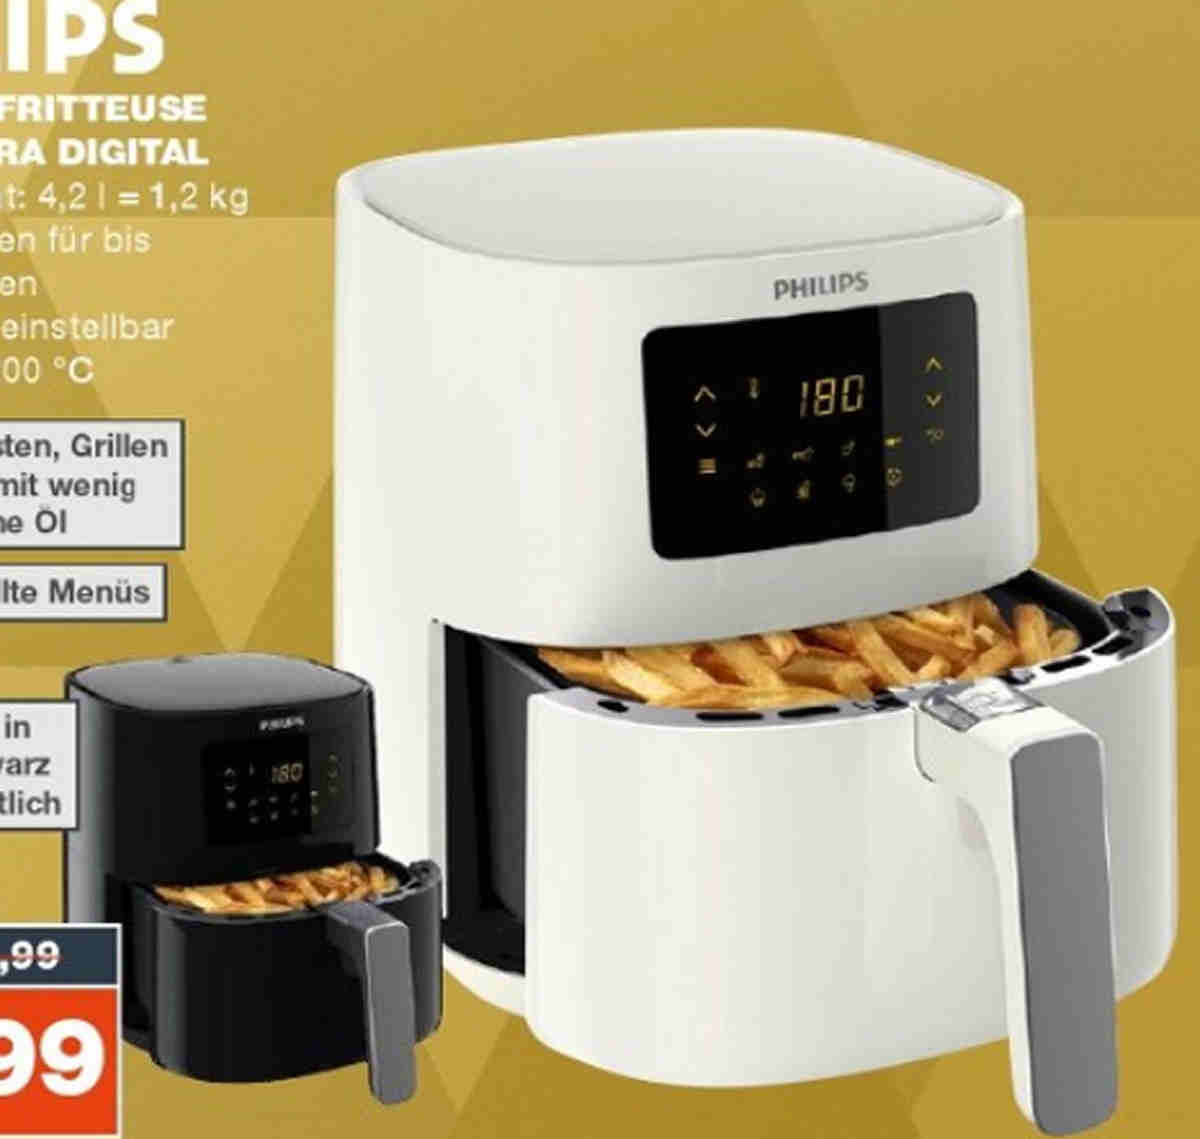 Philips Airfry Ultra Digital Heissluft-Fritteuse